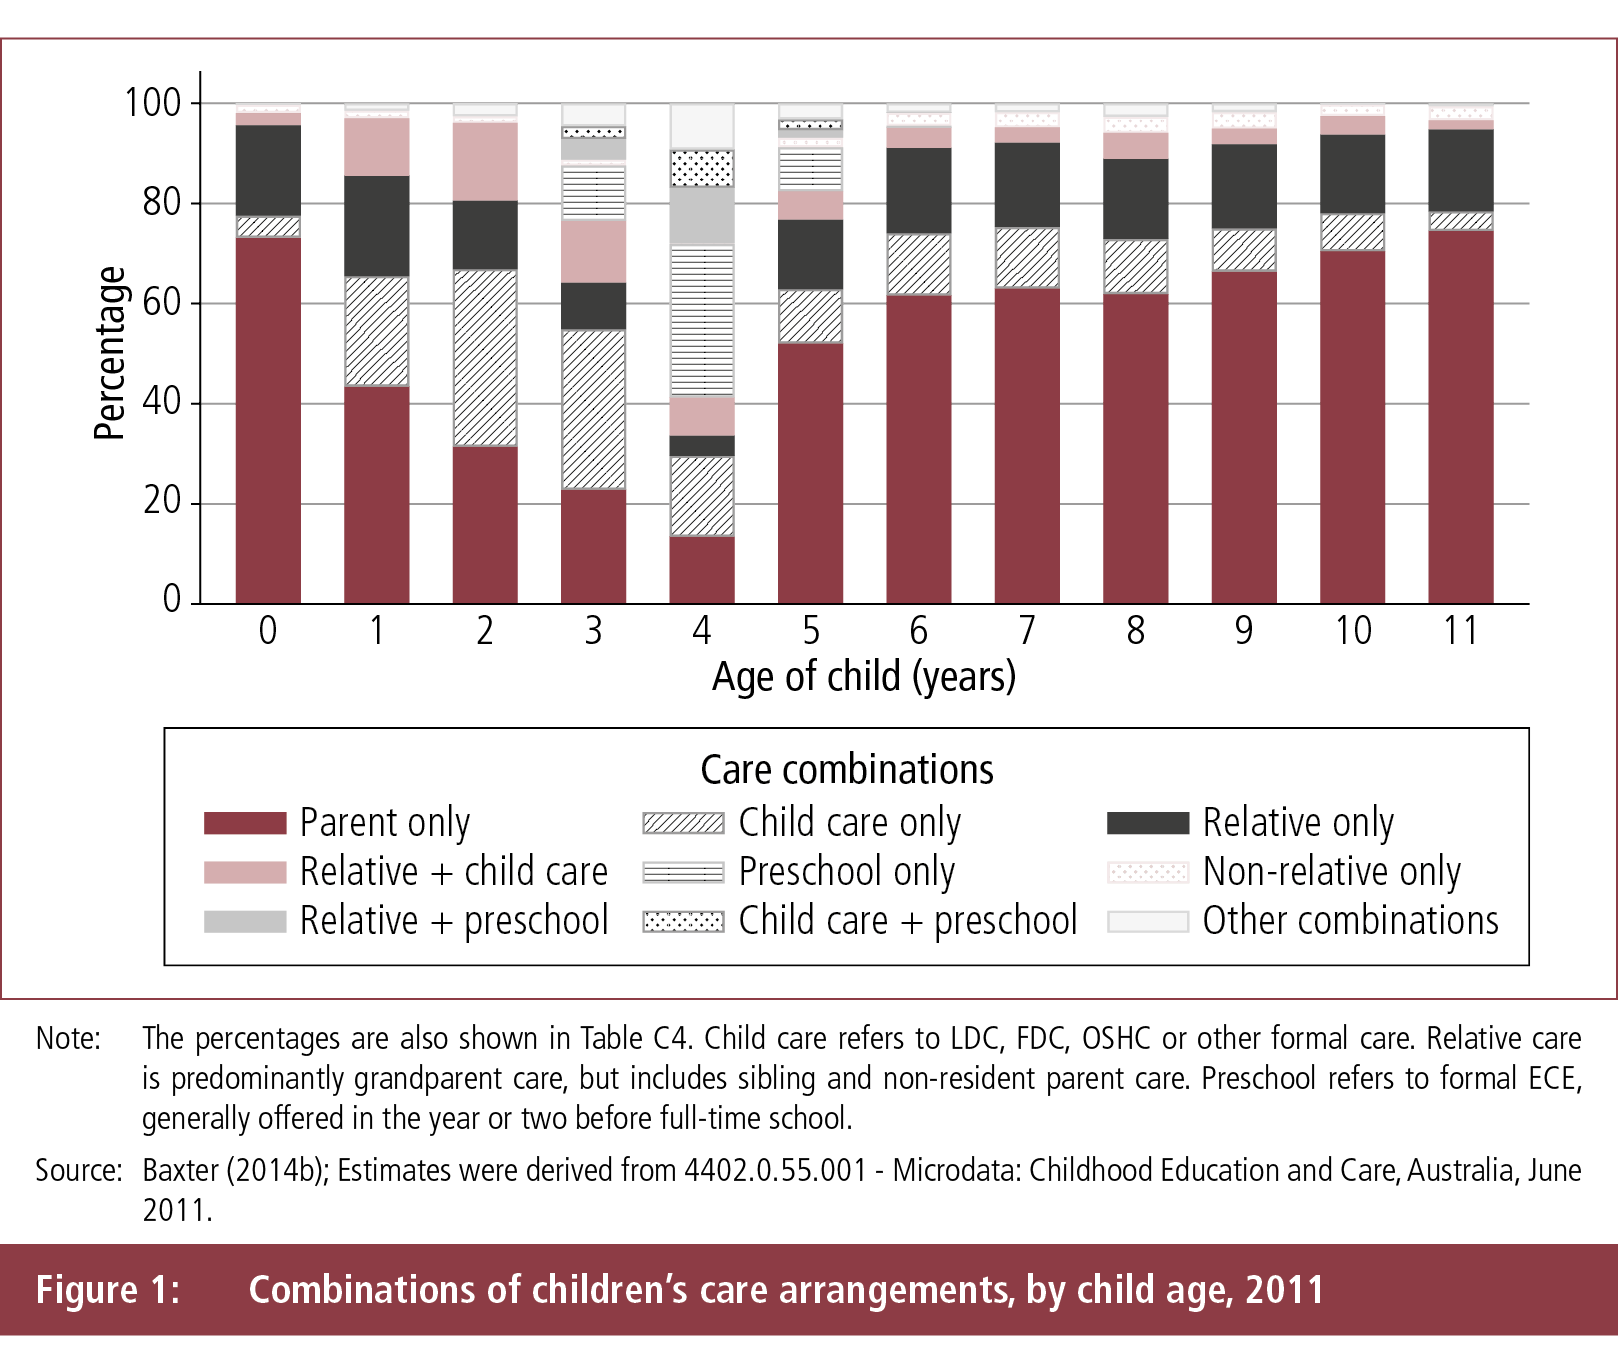 Figure 1: Combinations of children's care arrangements, by child age, 2011. Figure described in text.